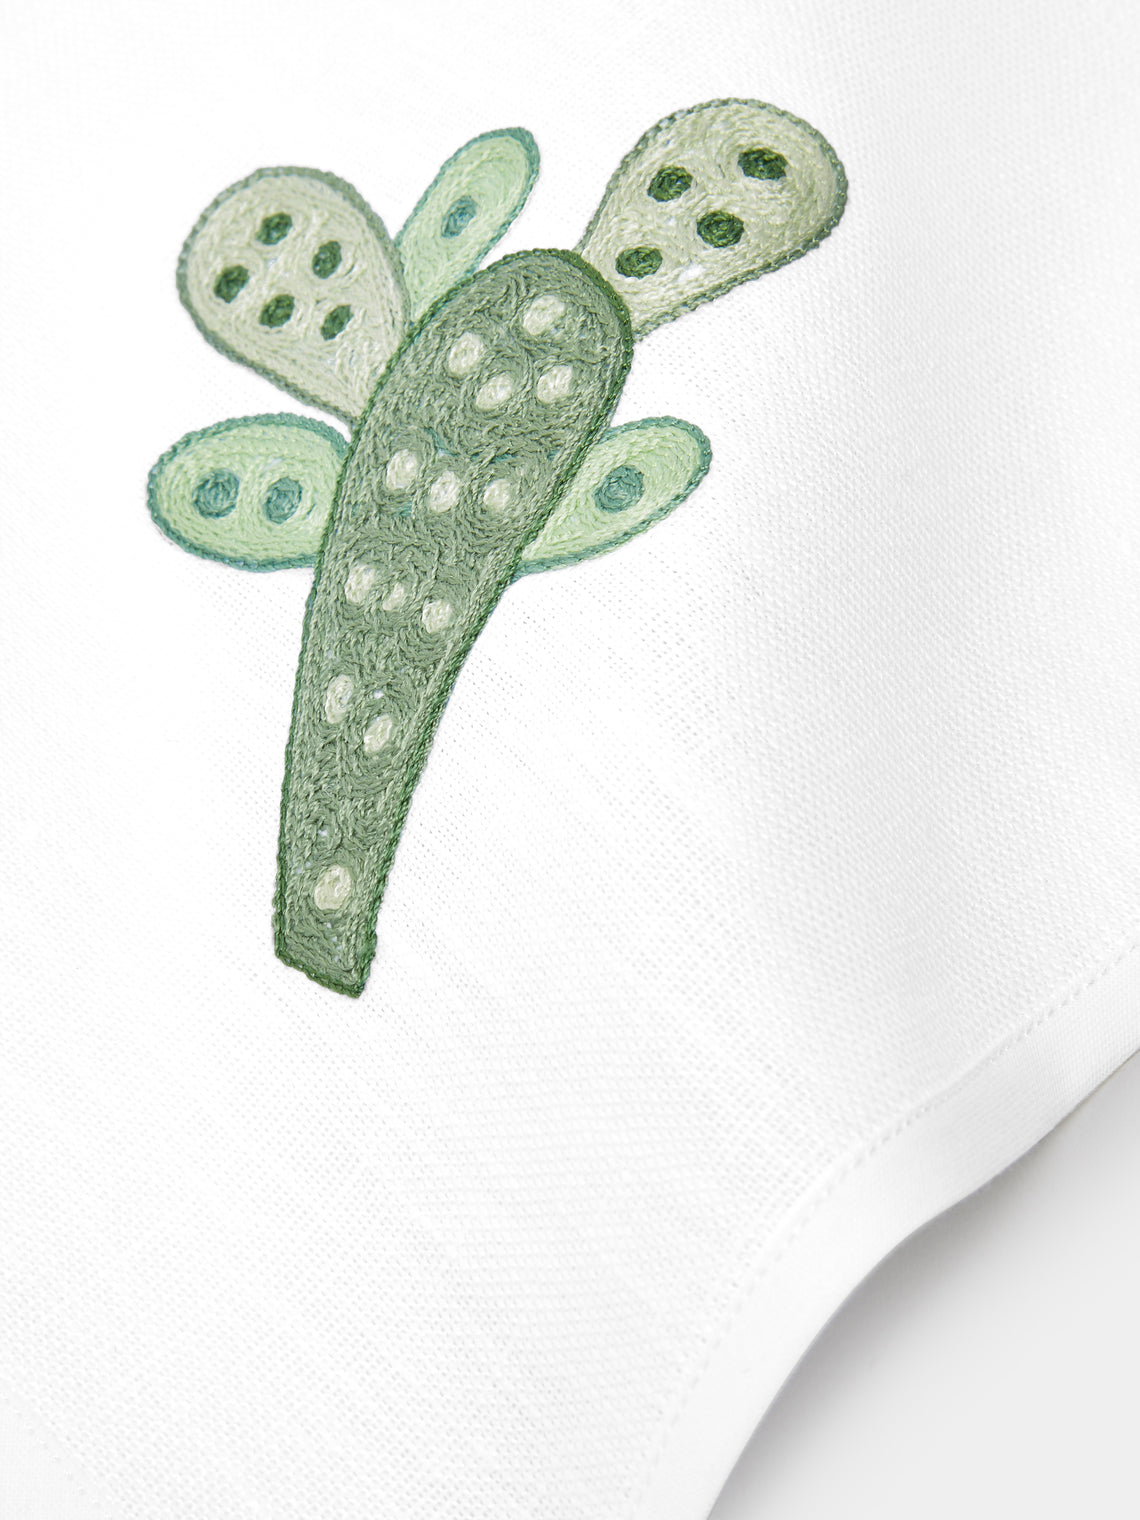 Loretta Caponi - Cactus Hand-Embroidered Linen Placemats and Napkins (Set of 2) - Multiple - ABASK